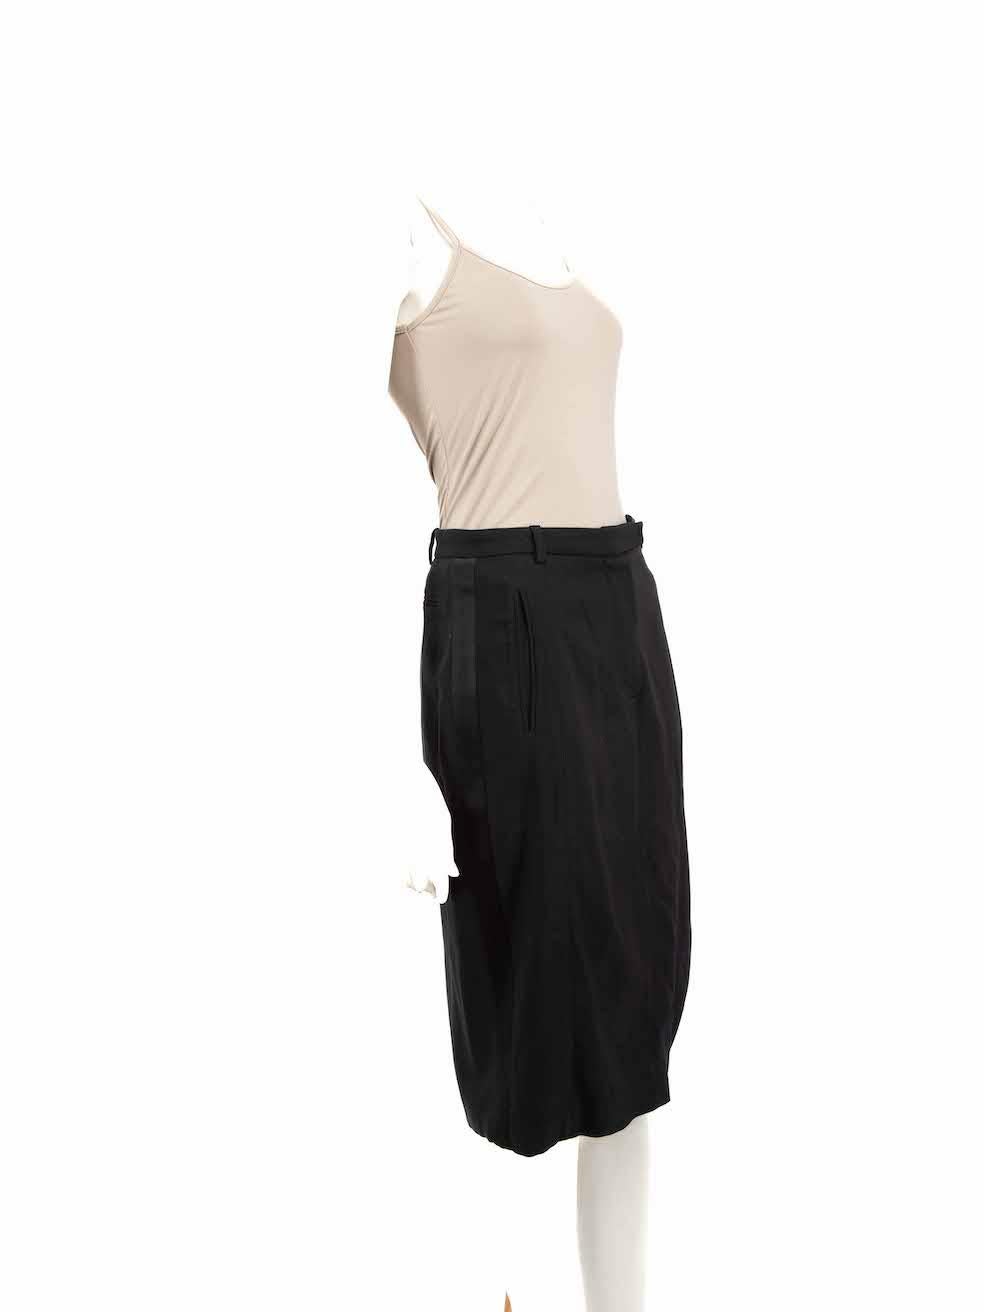 CONDITION is Good. Minor wear to Skirt is evident. Light wear is seen with a few pulls to the weave and some marks to the lining can be seen on this used Altuzarra designer resale item.
 
 
 
 Details
 
 
 Black
 
 Viscose
 
 Pencil skirt
 
 Knee